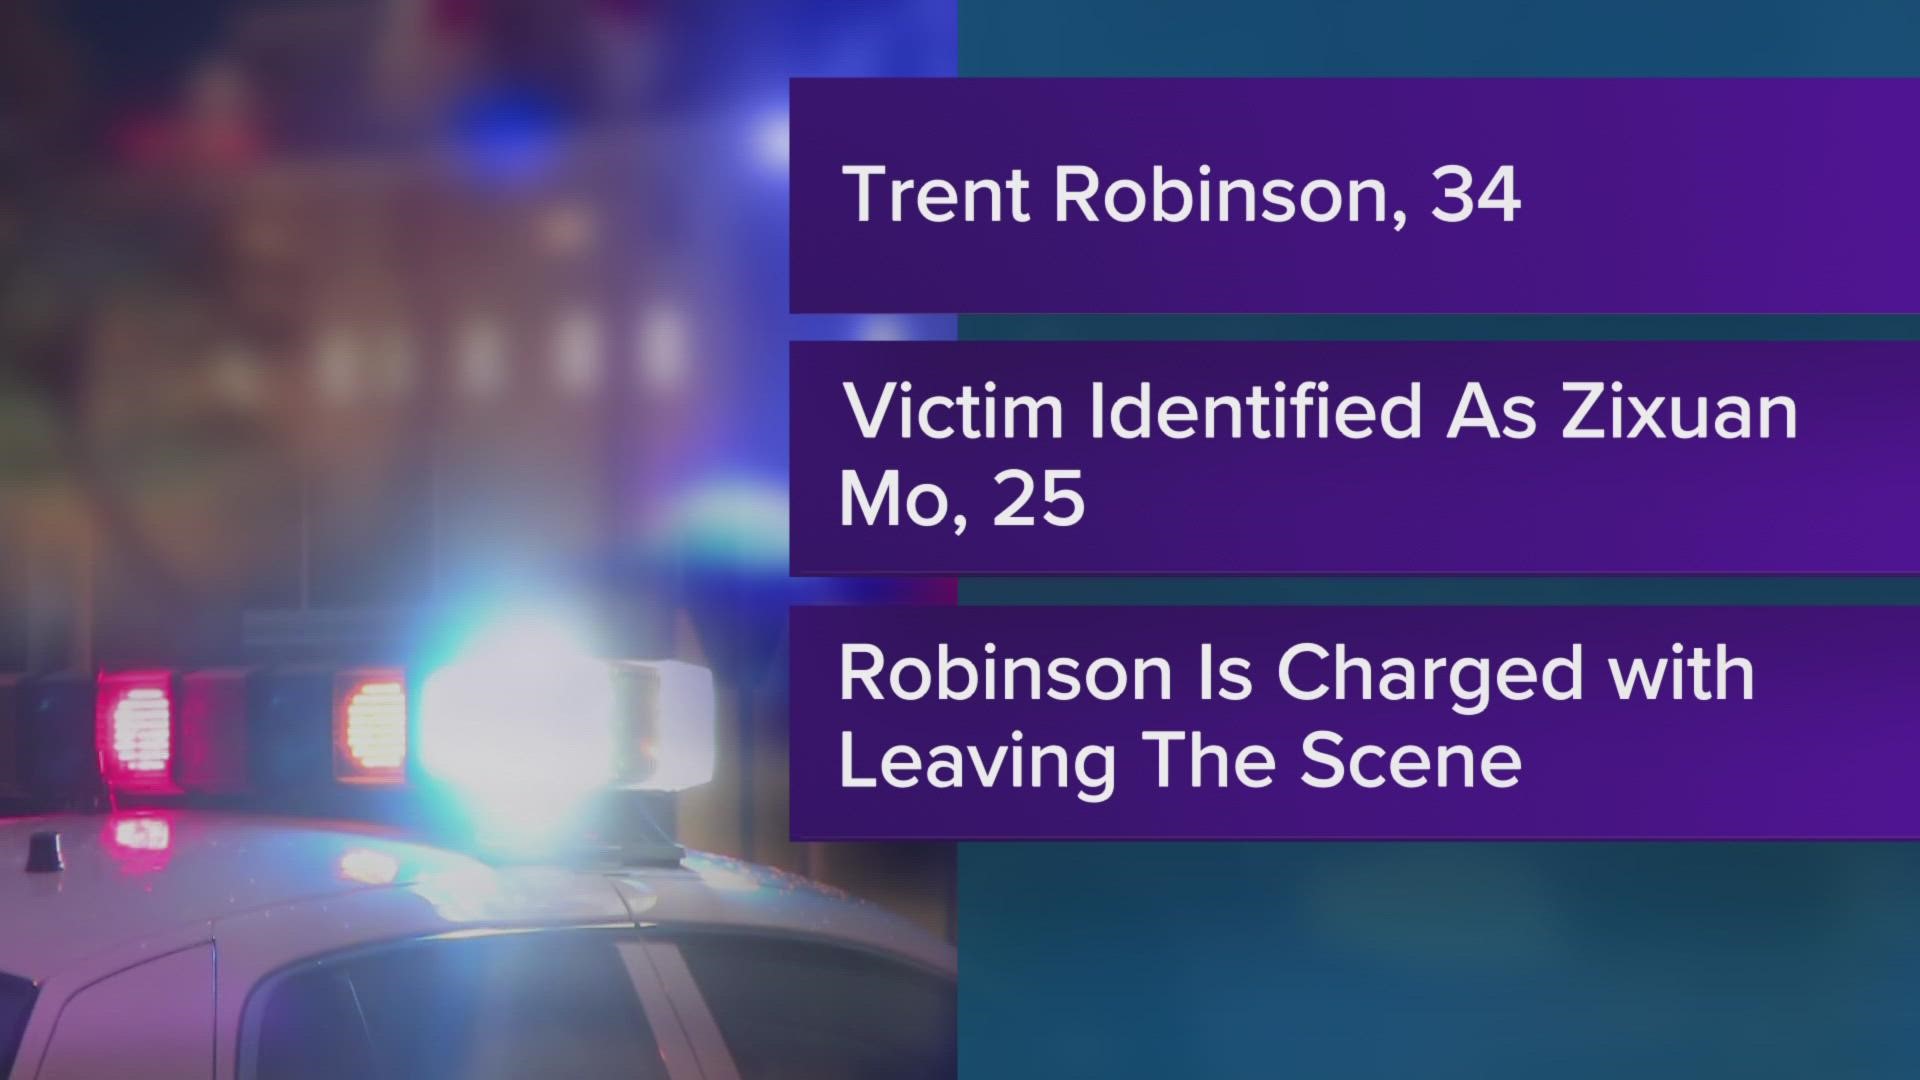 Police have arrested 34-year-old Trent Robinson in connection to a deadly hit and run in West Lafayette